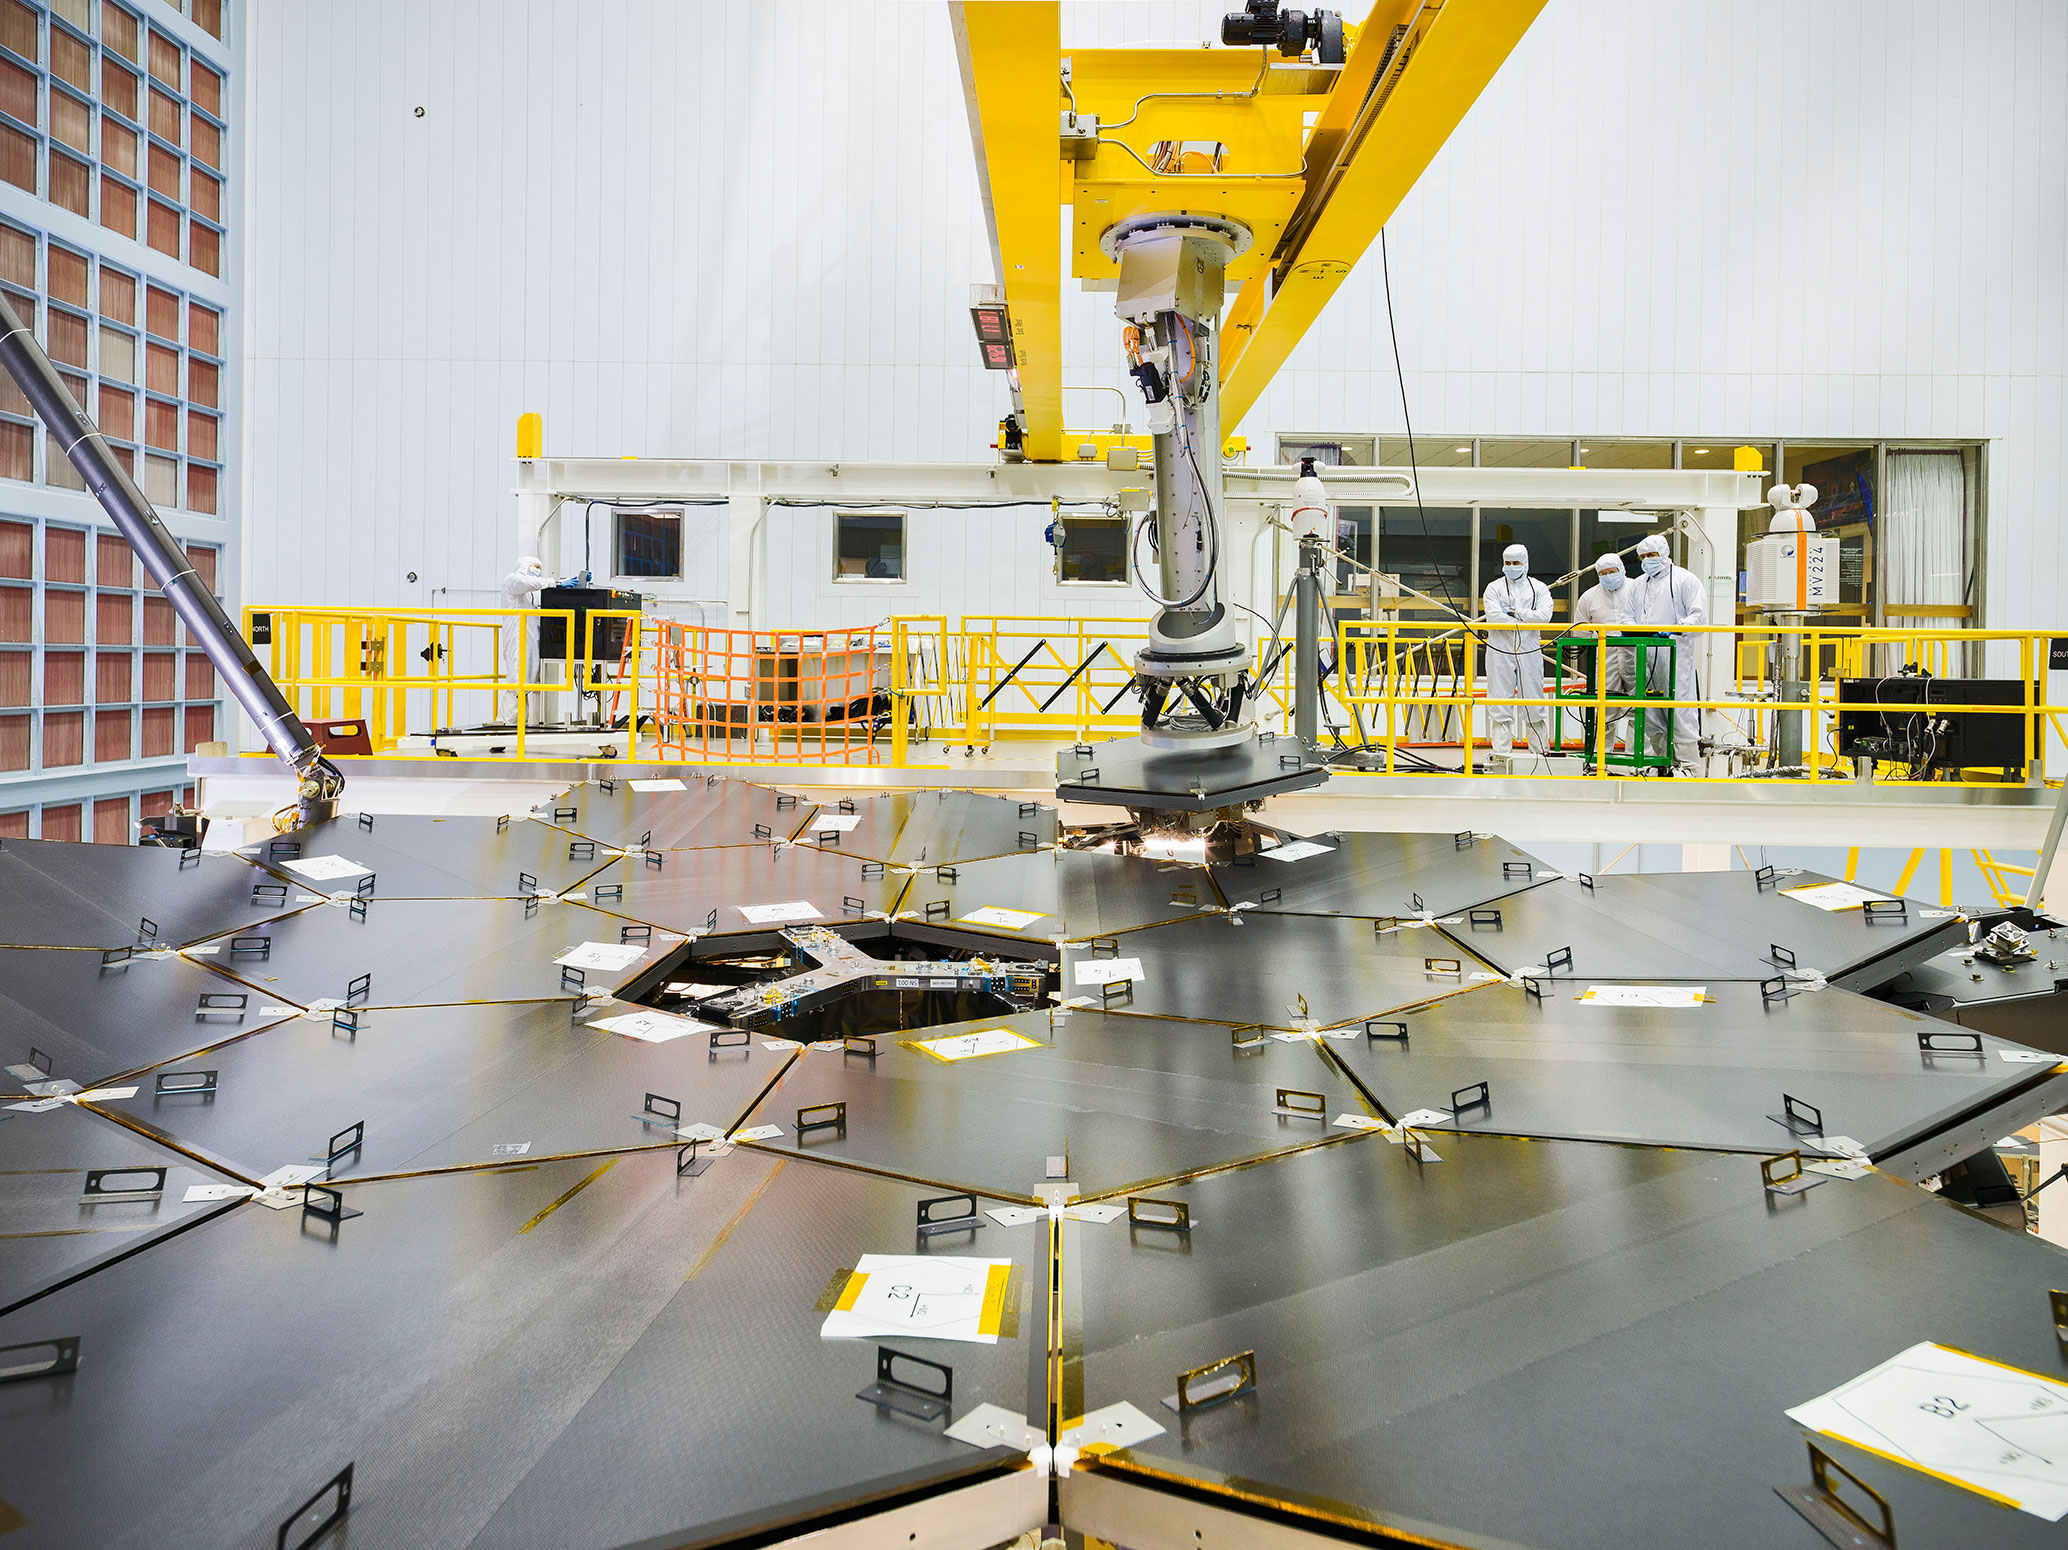 From NASA: "Inside a massive clean room at NASA's Goddard Space Flight Center in Greenbelt, Maryland the James Webb Space Telescope team used a robotic am to install the last of the telescope's 18 mirrors onto the telescope structure." NASA/Chris Gunn